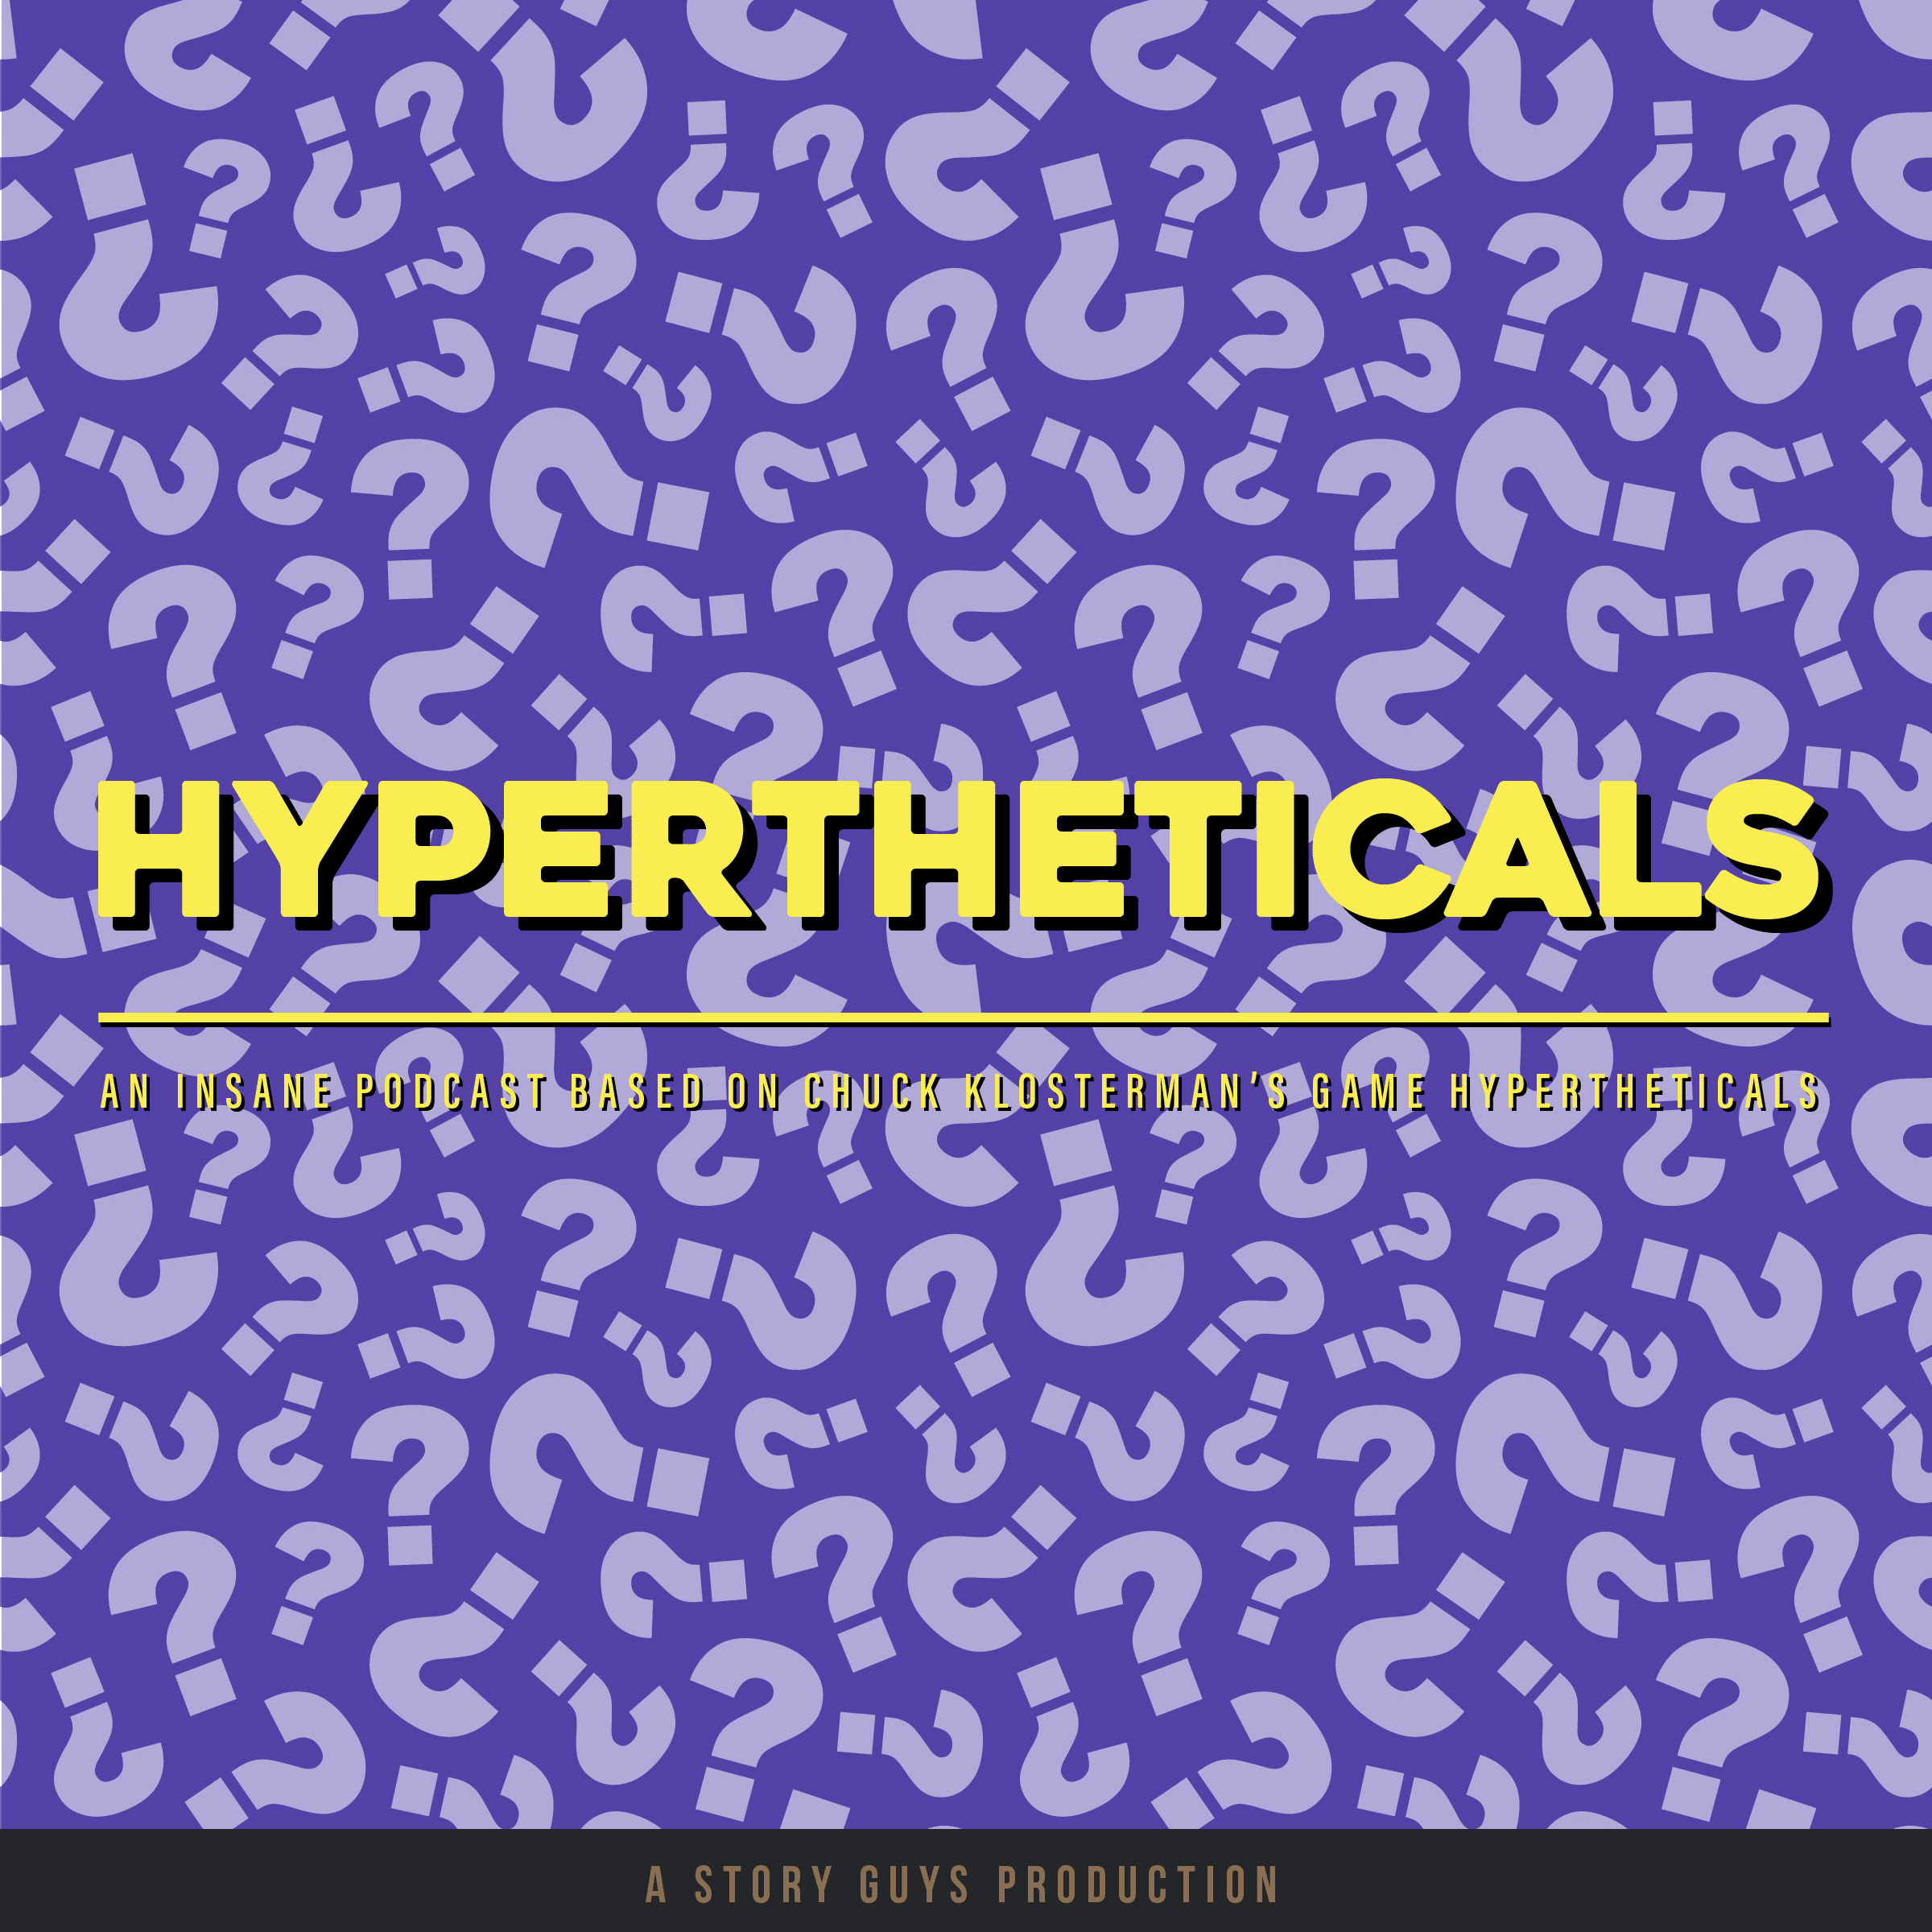 Logo for the Hypertheticals podcast